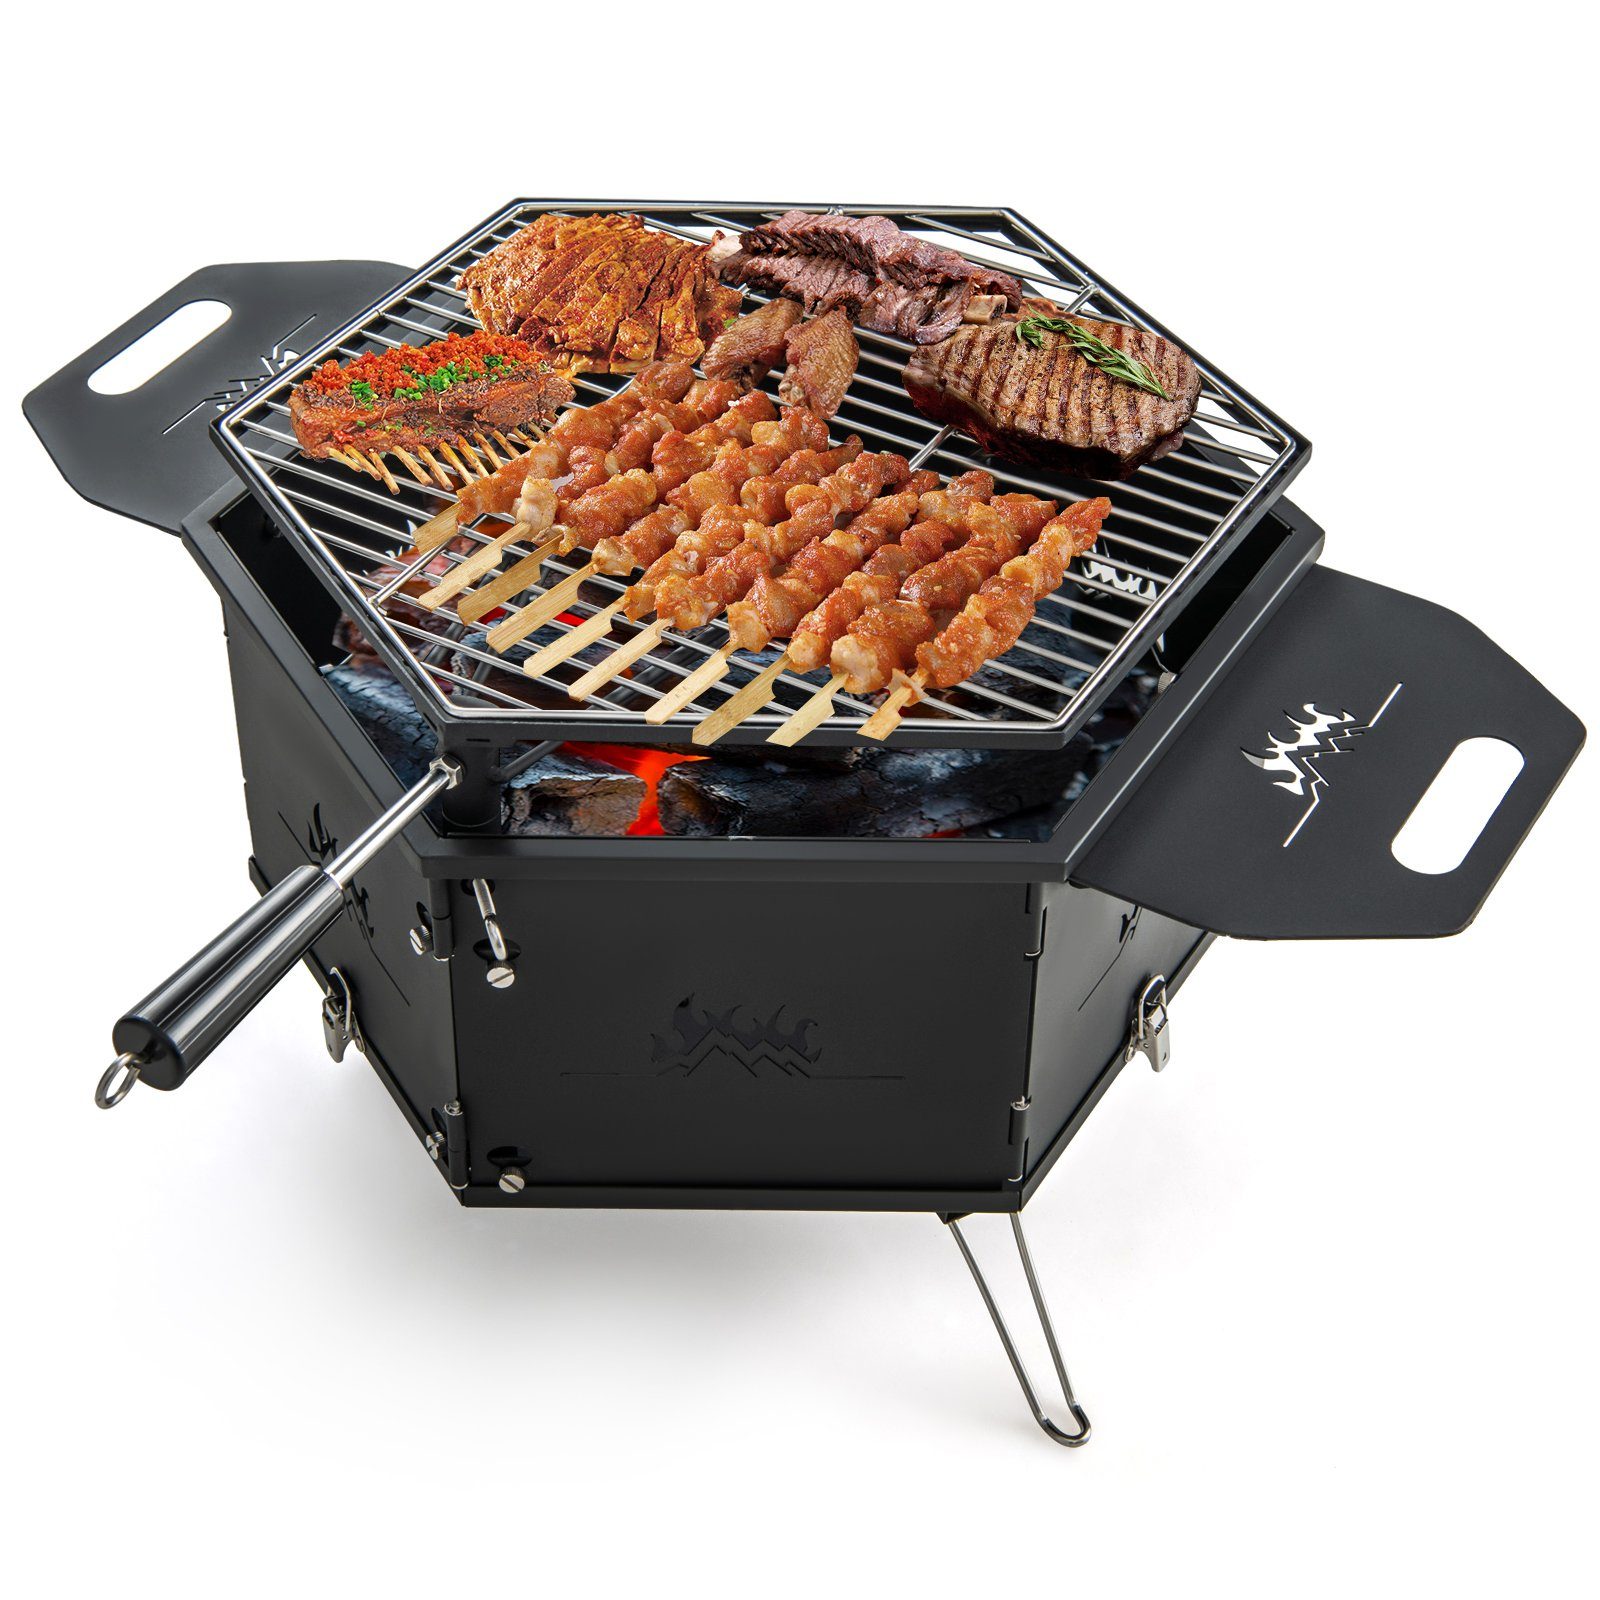 COSTWAY Holzkohlegrill, 3 in 1 Campinggrill, Outdoor